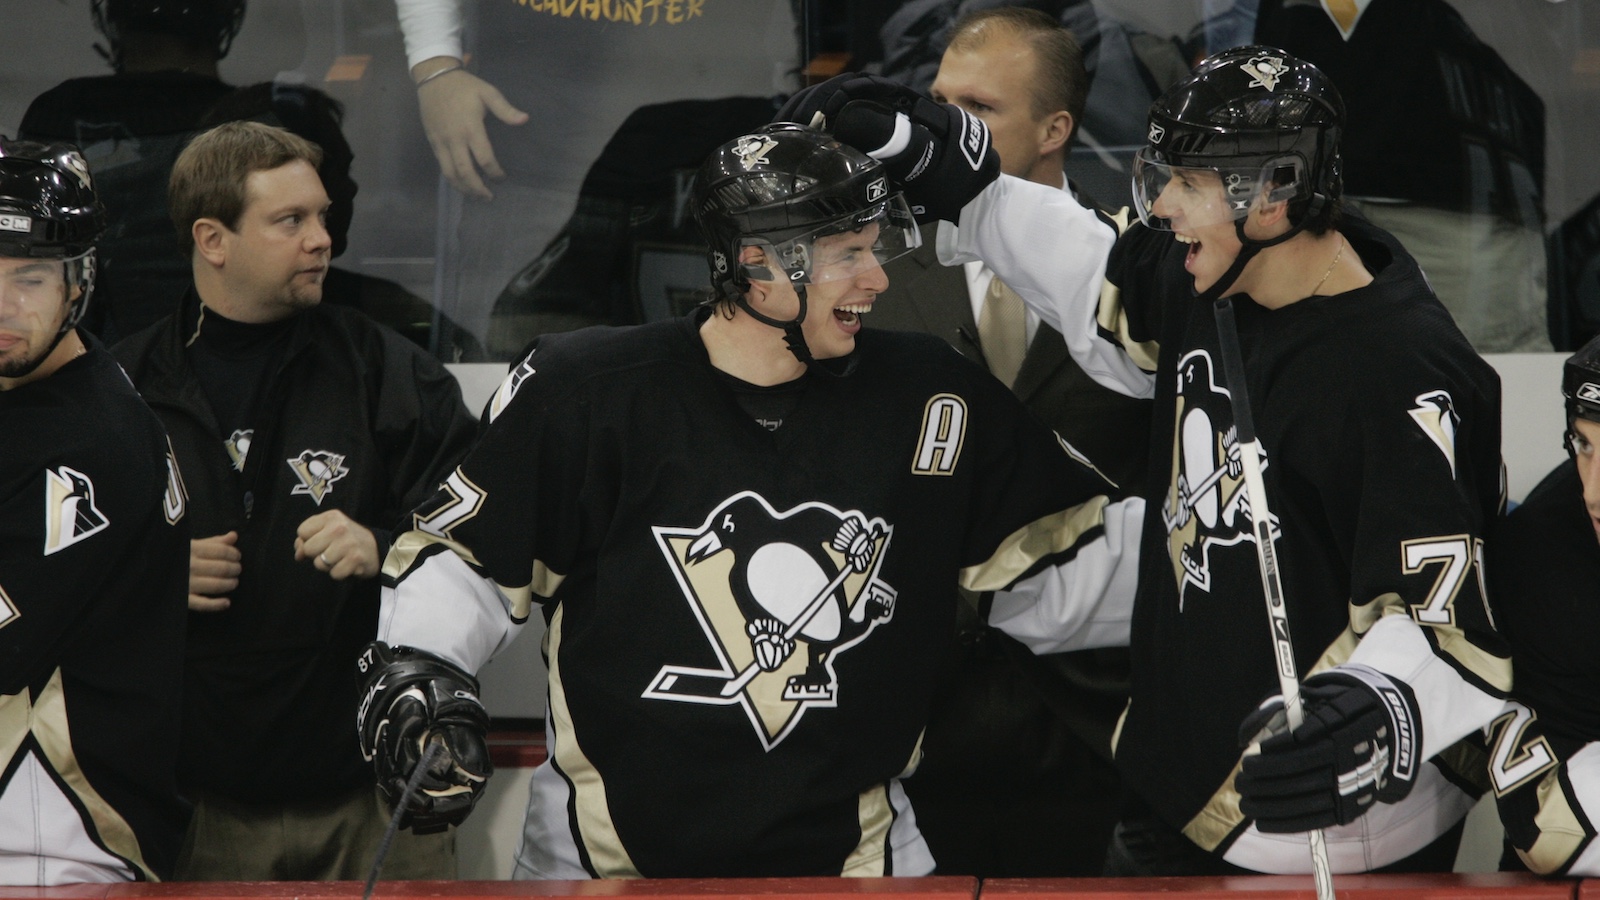 Evgeni Malkin practices with Pittsburgh Penguins teammates